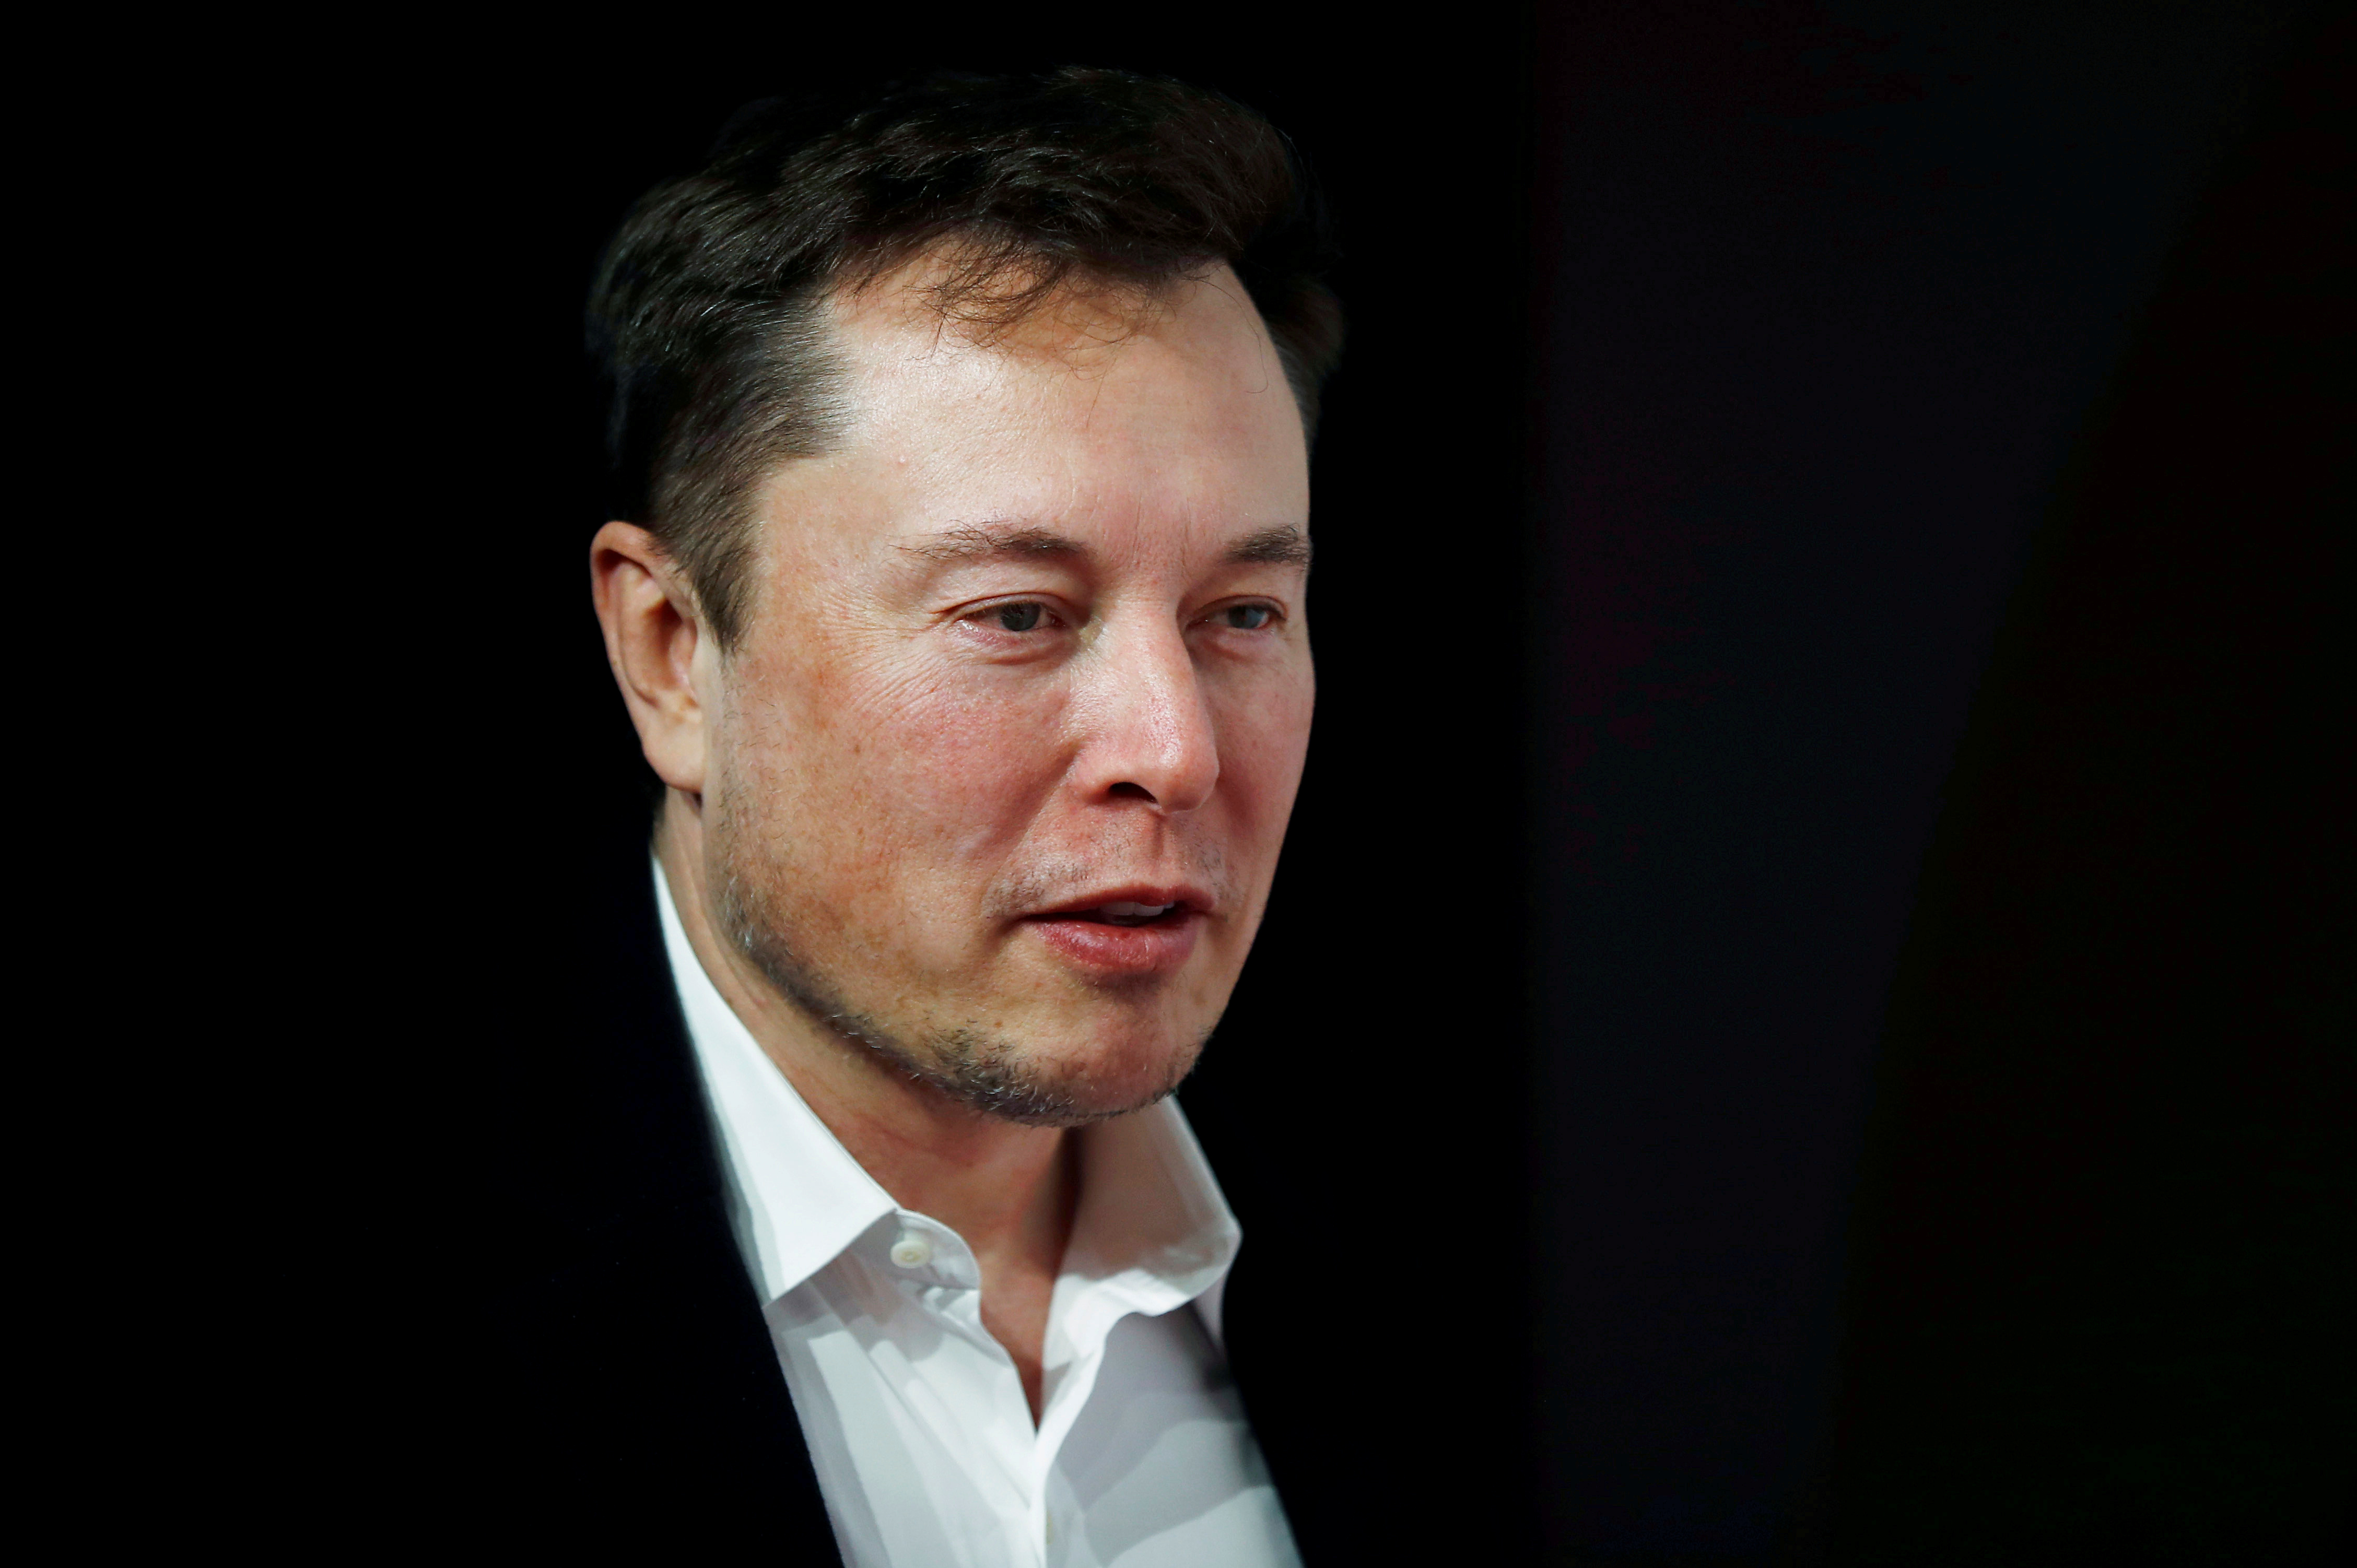 What Elon Musk is looking for at the moment to sign talents for Tesla and SpaceX